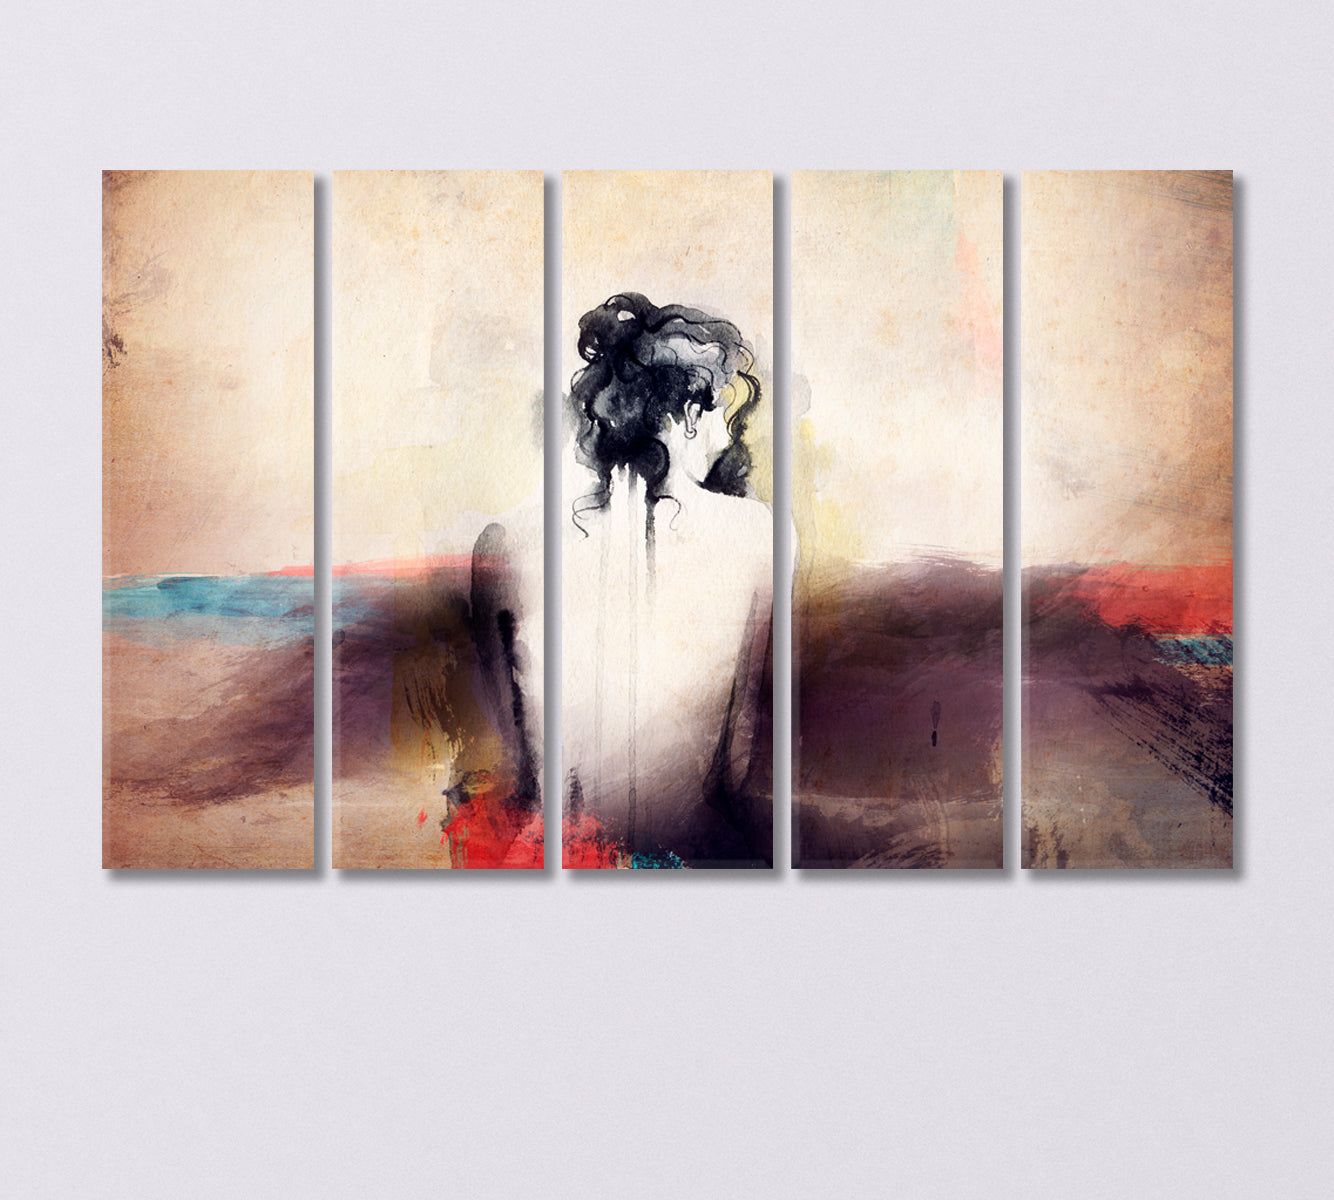 Abstract Woman Body Silhouette Canvas Print-Canvas Print-CetArt-5 Panels-36x24 inches-CetArt